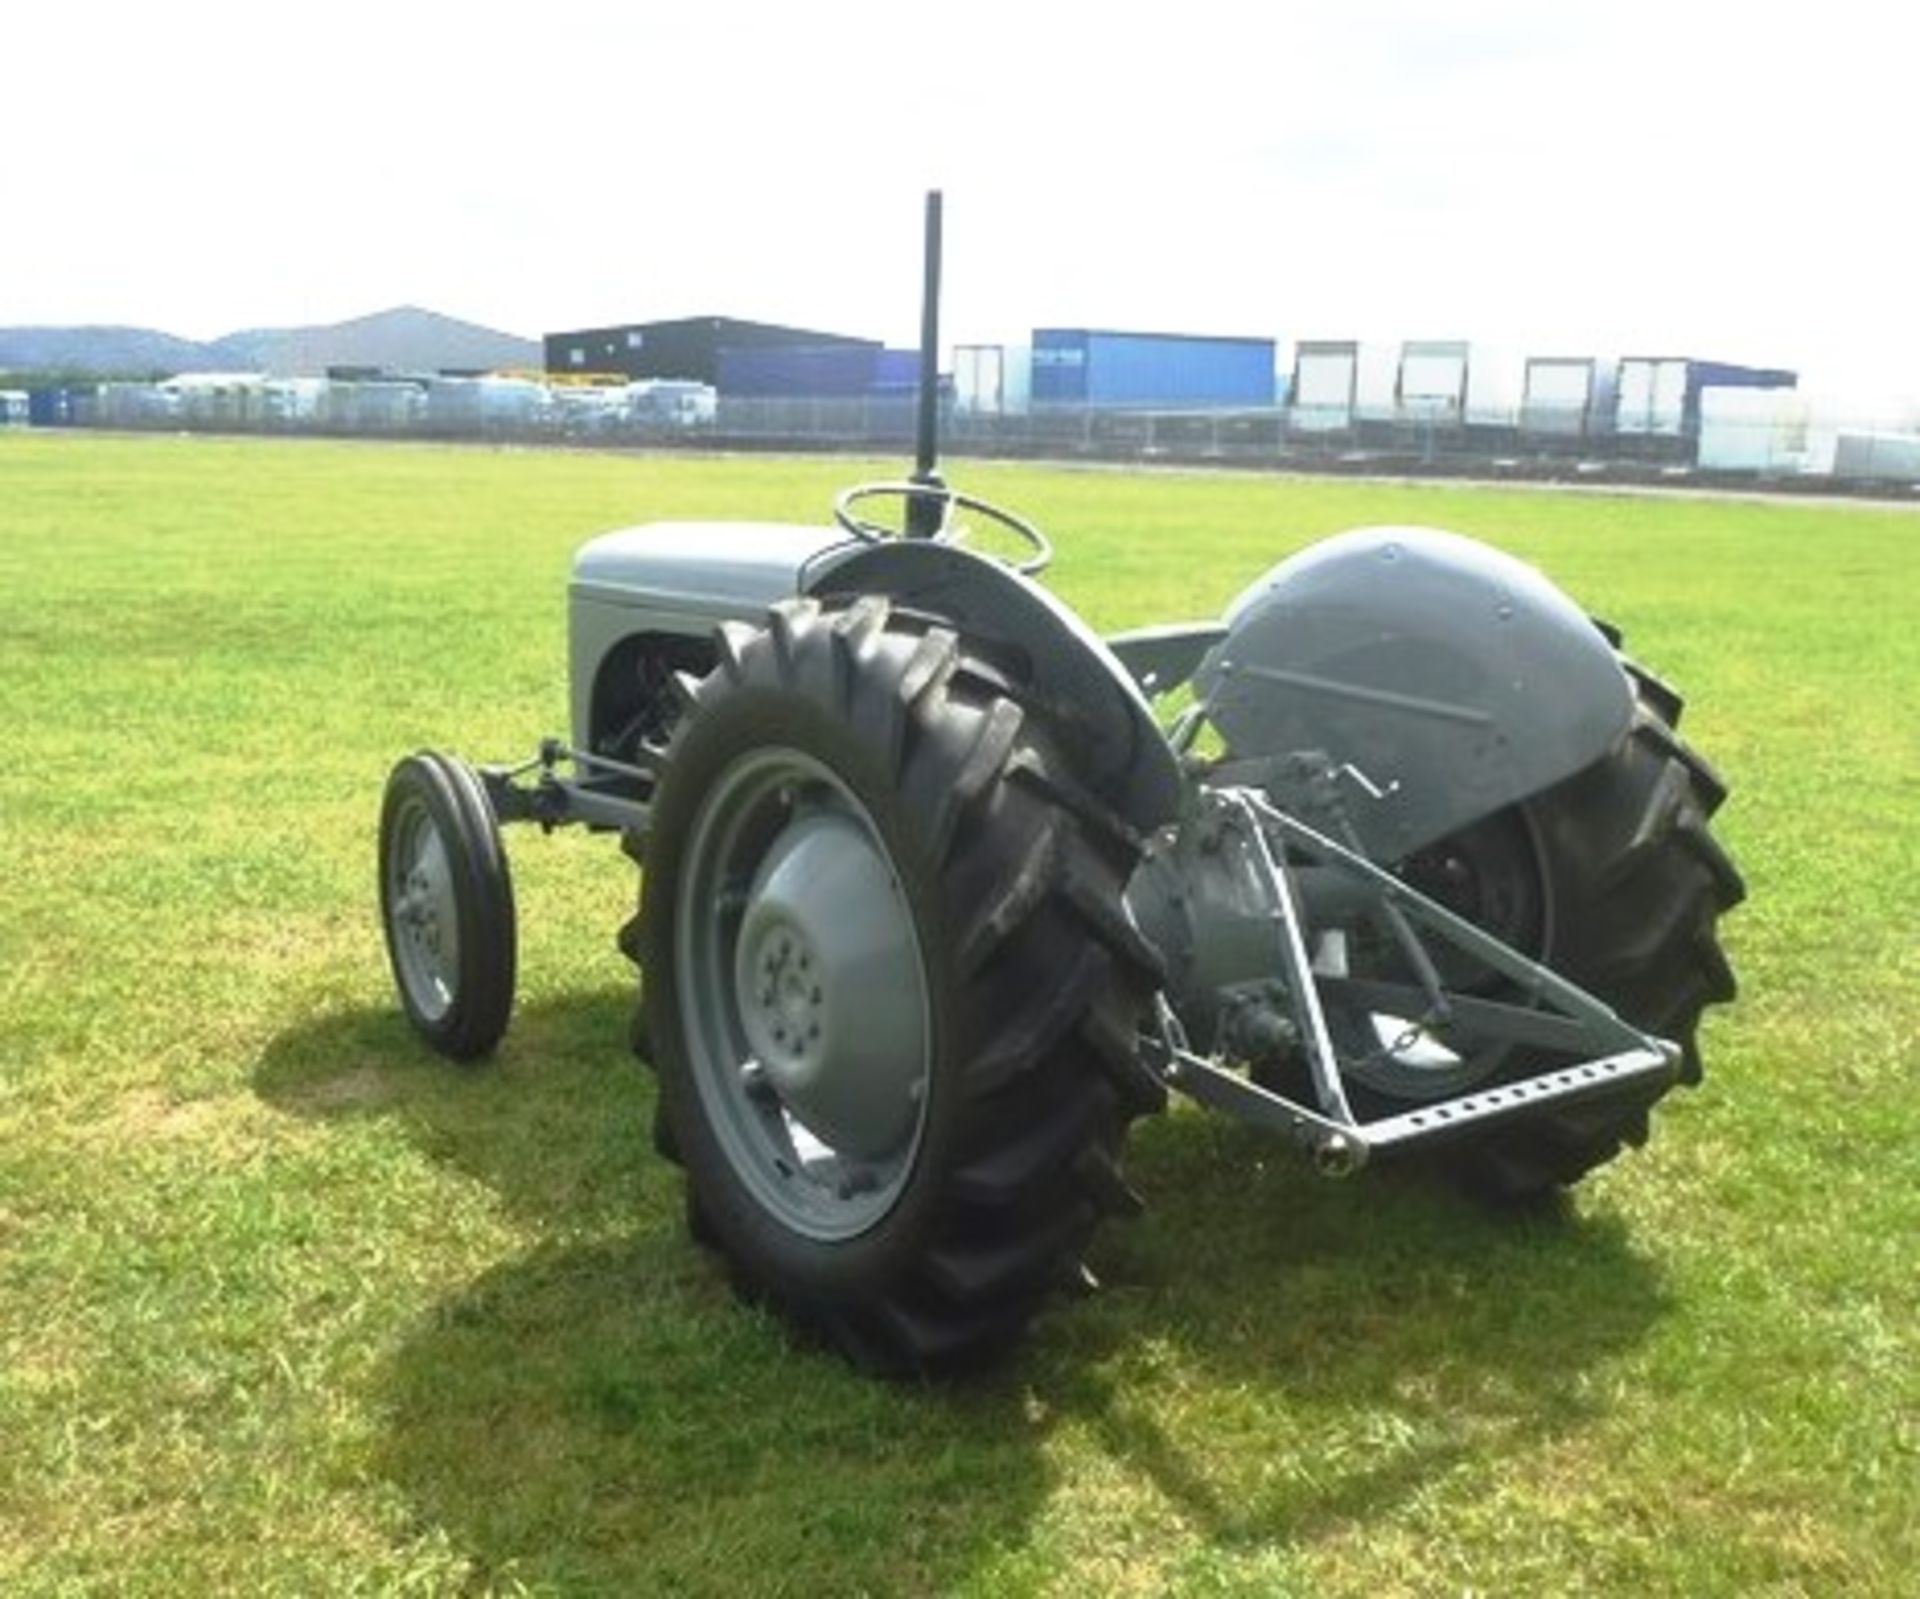 1951 MASSEY FERGUSON TED20 PETROL TRACTOR (GREY) MILEAGE NOT KNOWN - NO DIAL - Image 10 of 12